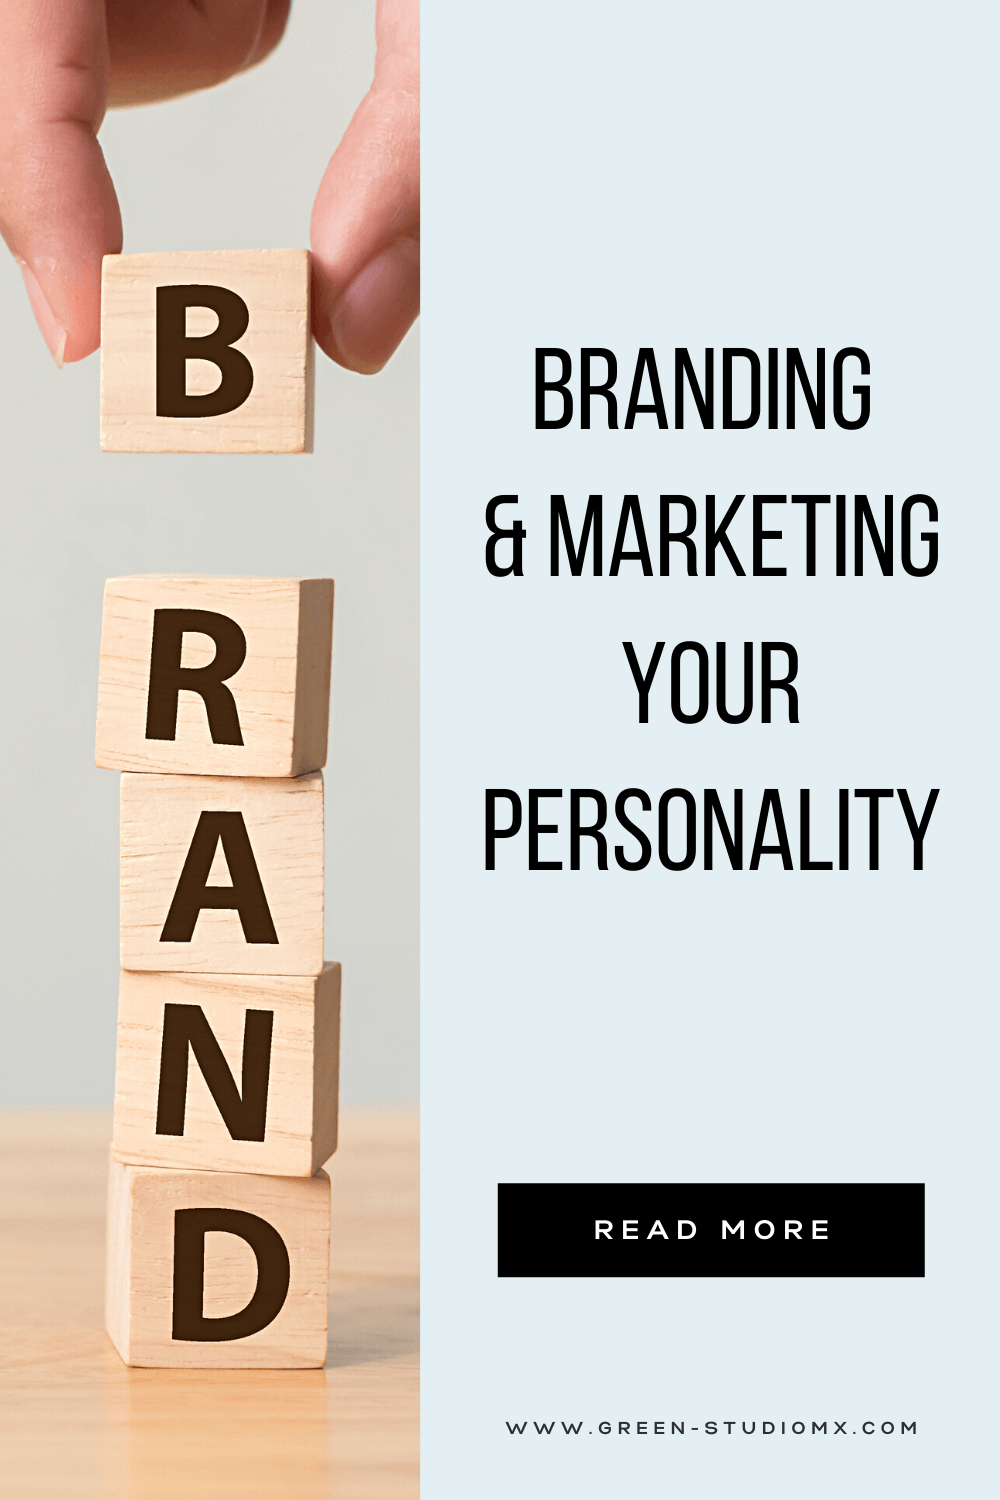 Branding & Marketing Your Personality